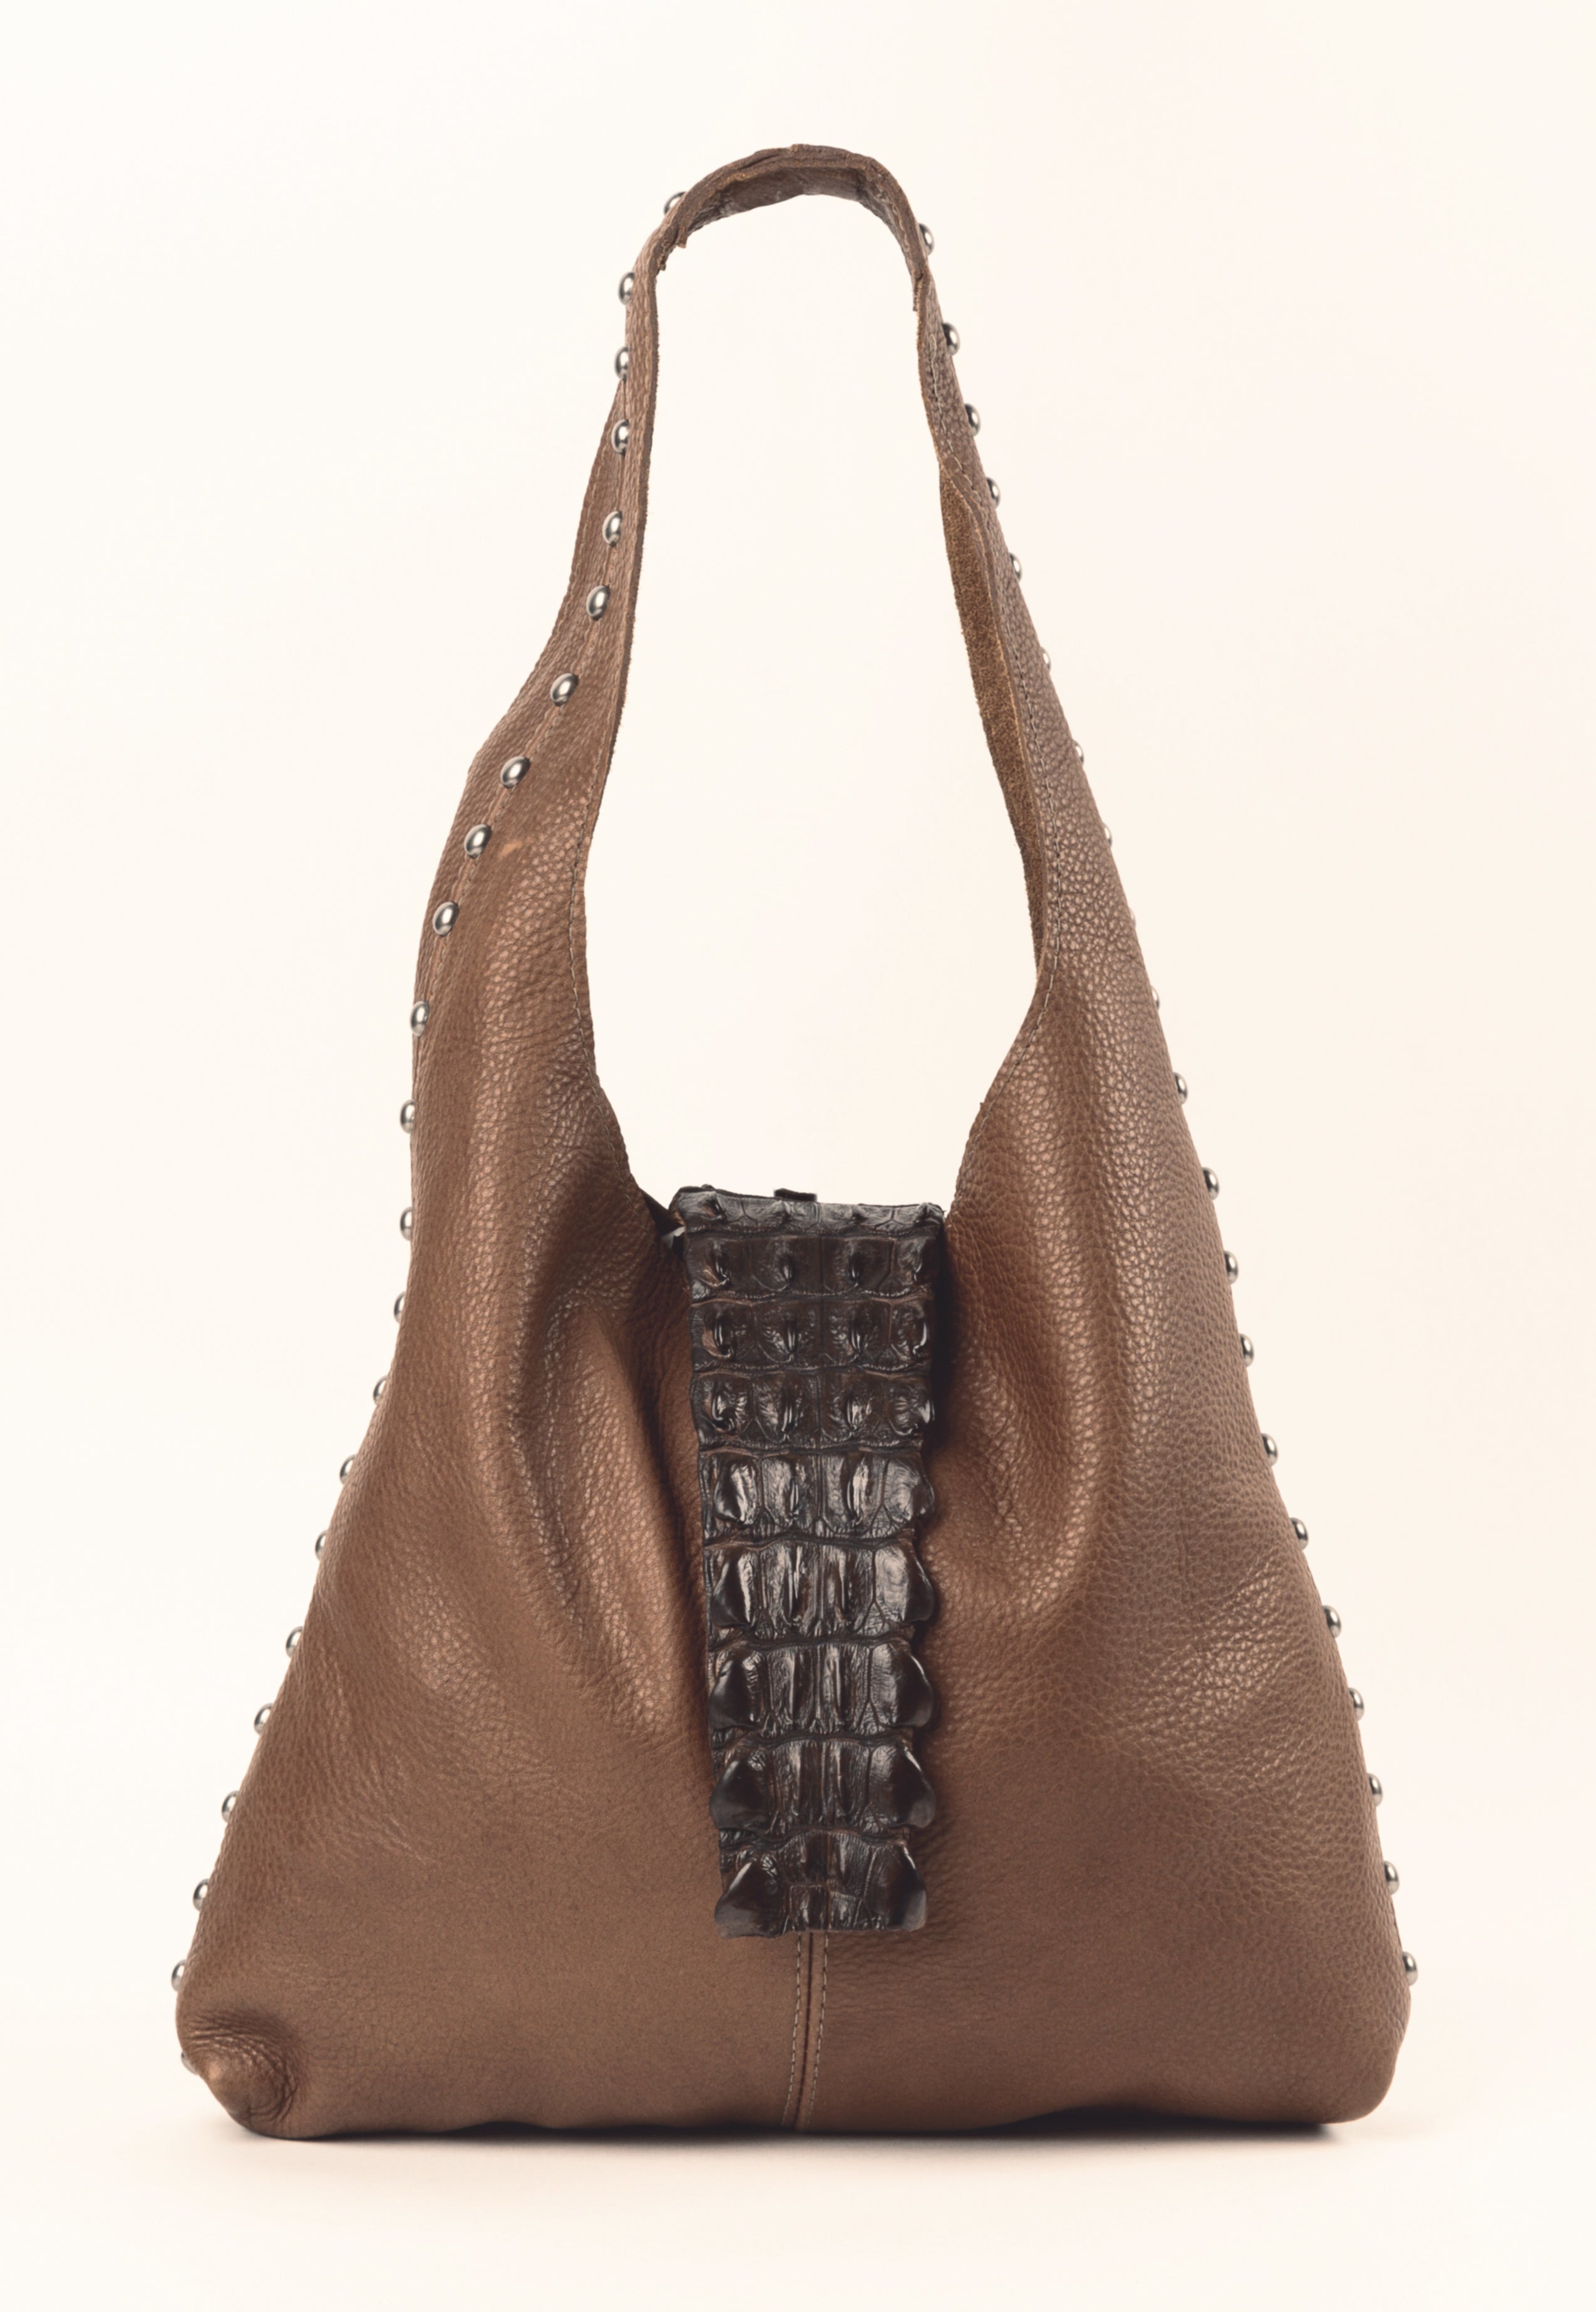 Tan leather short slouch bag